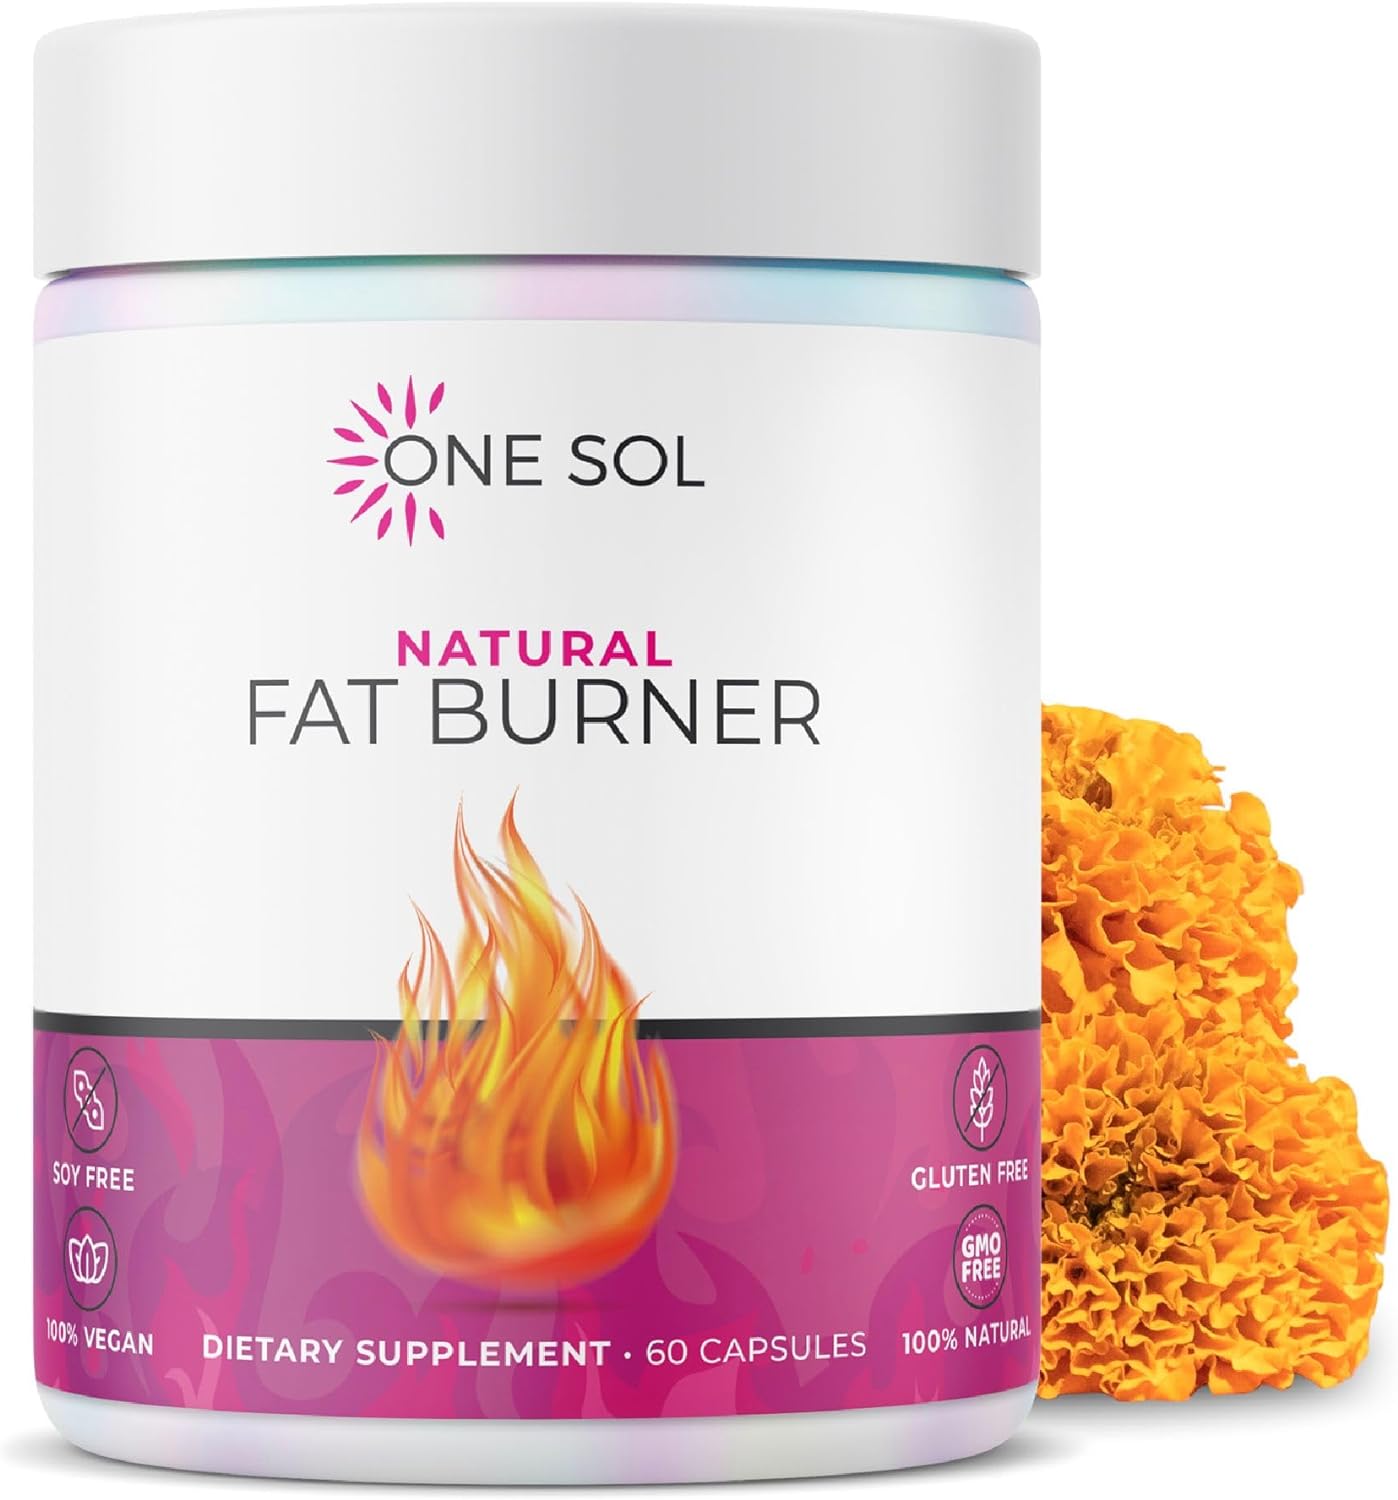 One Sol Fat Burner for Women, Natural Metabolism Booster, Burn More Calories, Boost Energy  Mood, Curb Appetite  Stop Cravings, No Crash or Jitters, All-Natural Ingredients, Gluten  Soy Free